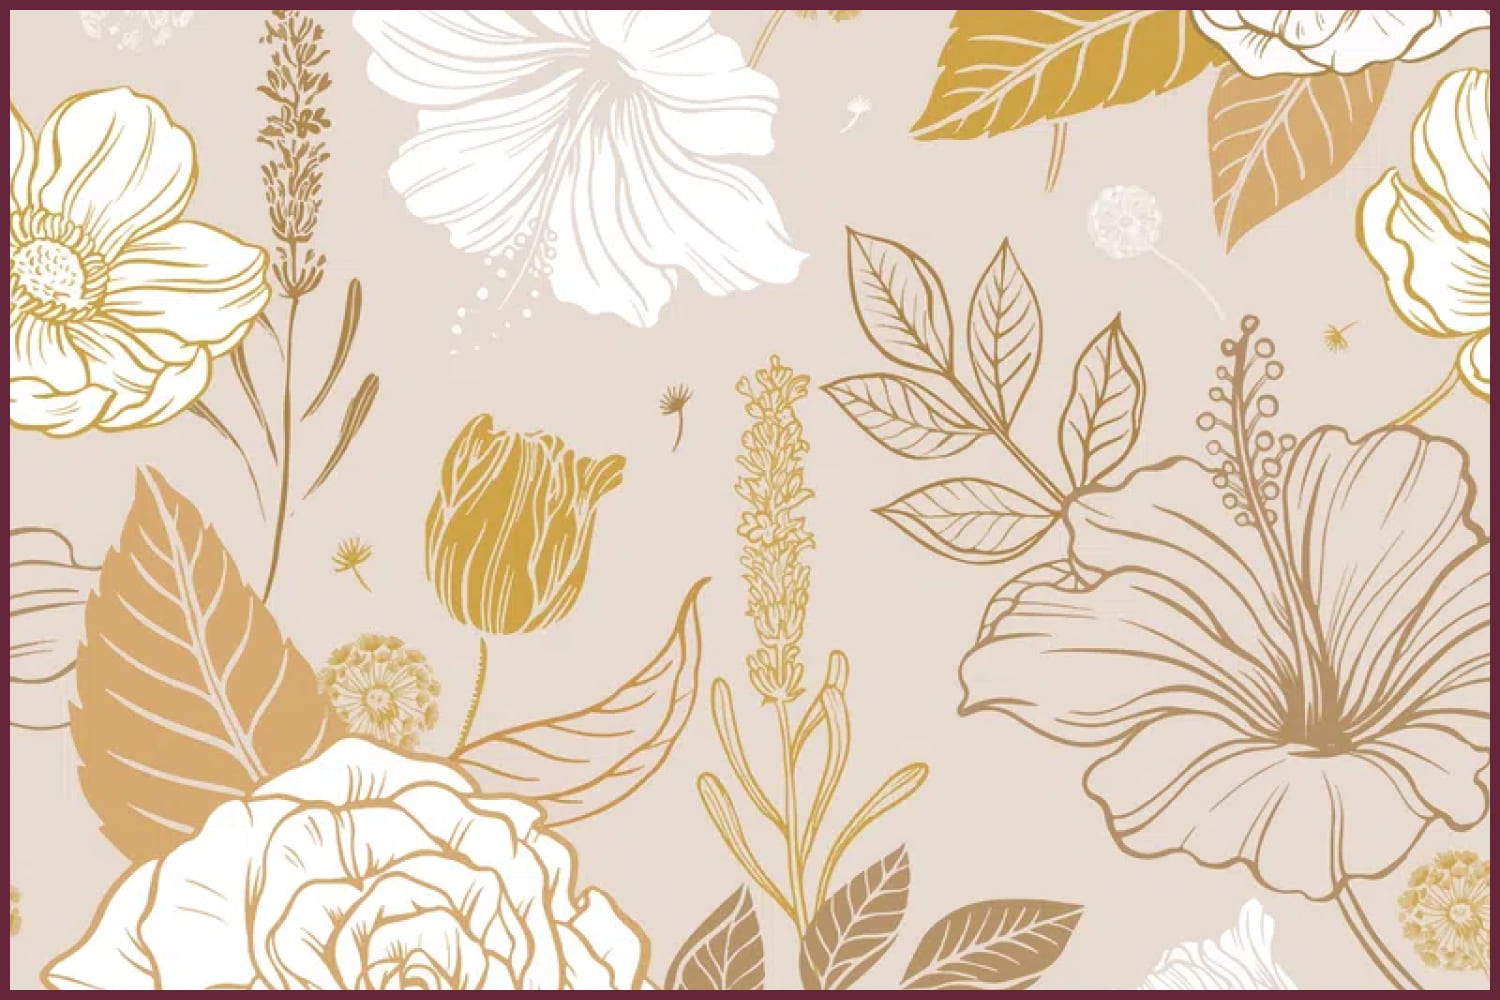 Elegant pattern with golden flowers filled with retro style.